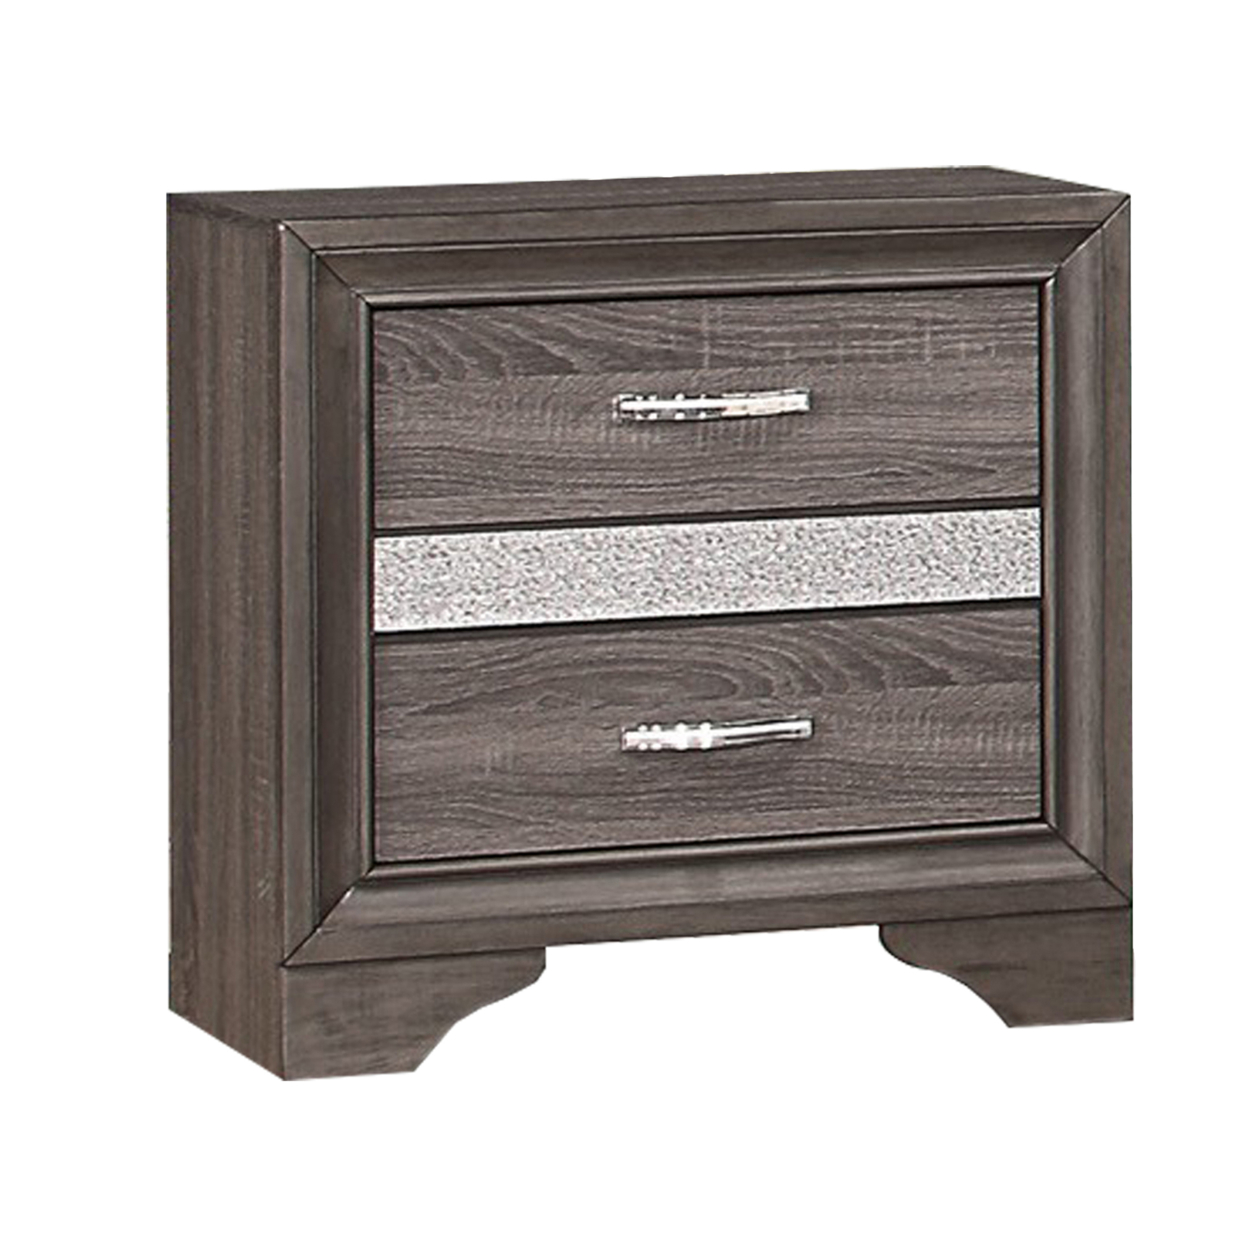 2 Drawer Wooden Nightstand With 1 Hidden Jewelry Drawers, Gray And Silver- Saltoro Sherpi